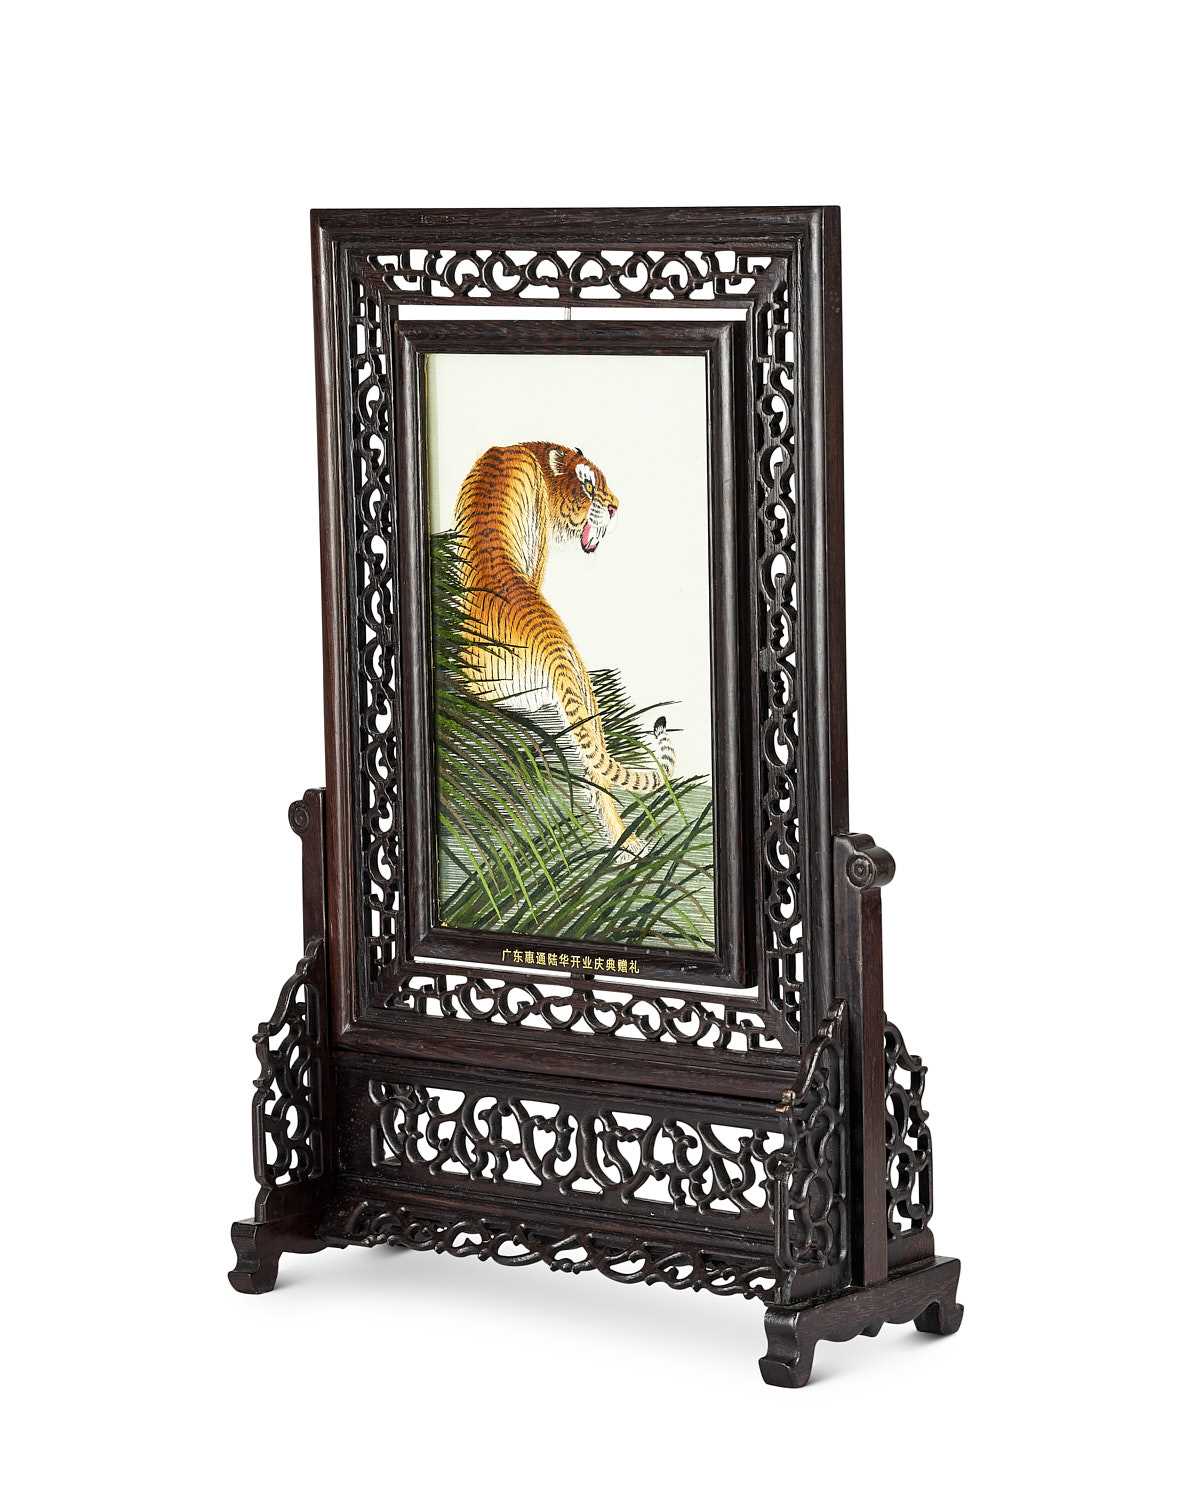 A CHINESE CARVED WOOD TABLE SCREEN WITH SILK PANEL OF A TIGER